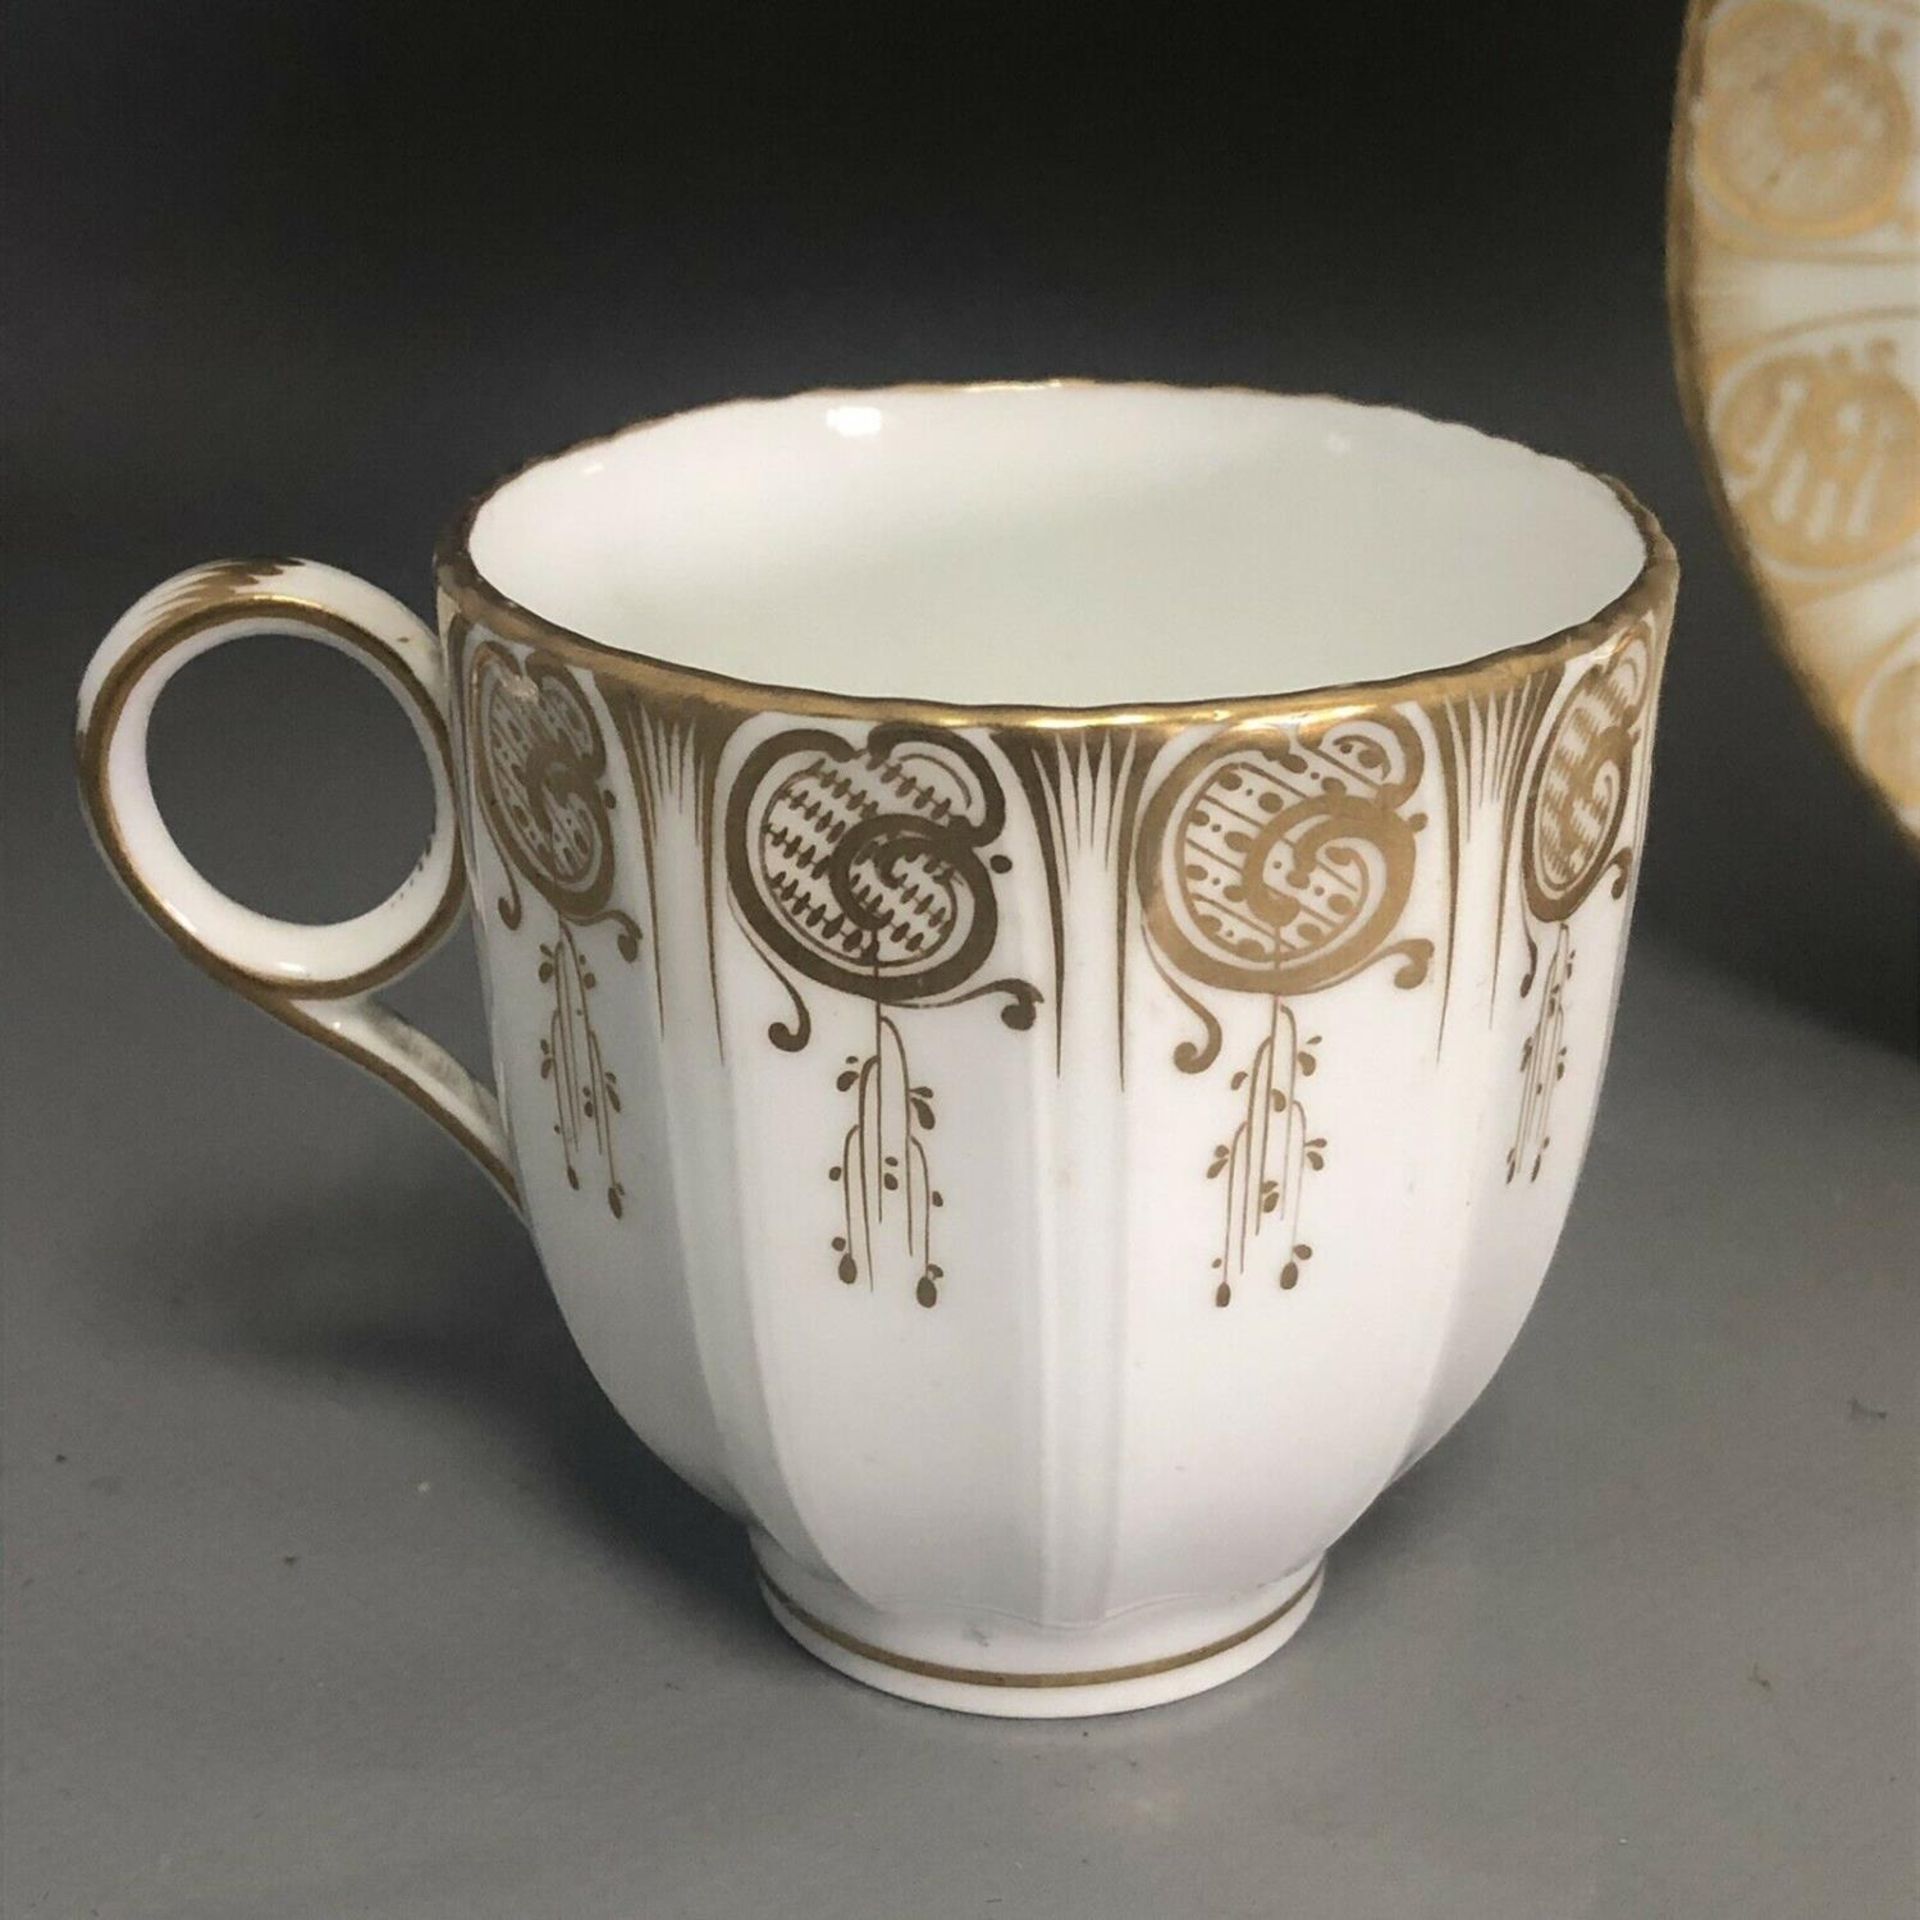 c1880, A Davenport Porcelain Group - Coffee Can, Tea Cup & Saucer - Image 3 of 6